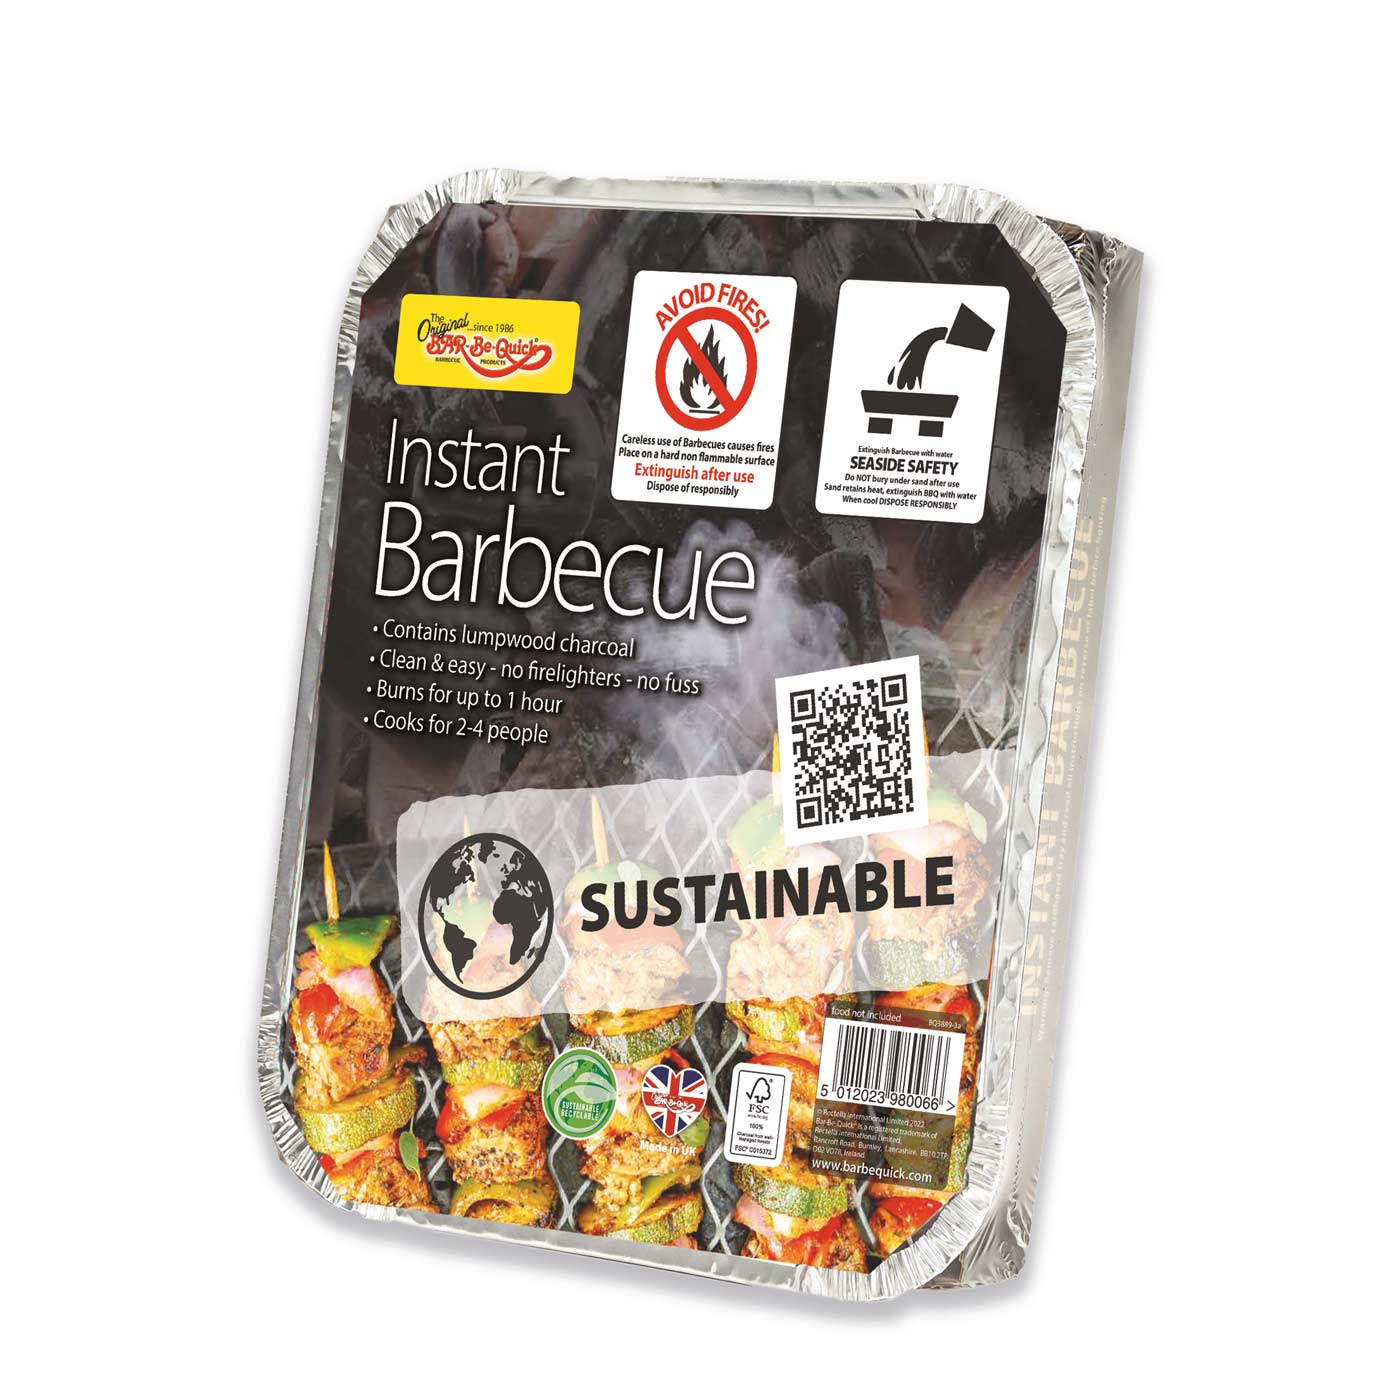 Bar-Be-Quick-Instant-Barbecue-sustainable-HRF